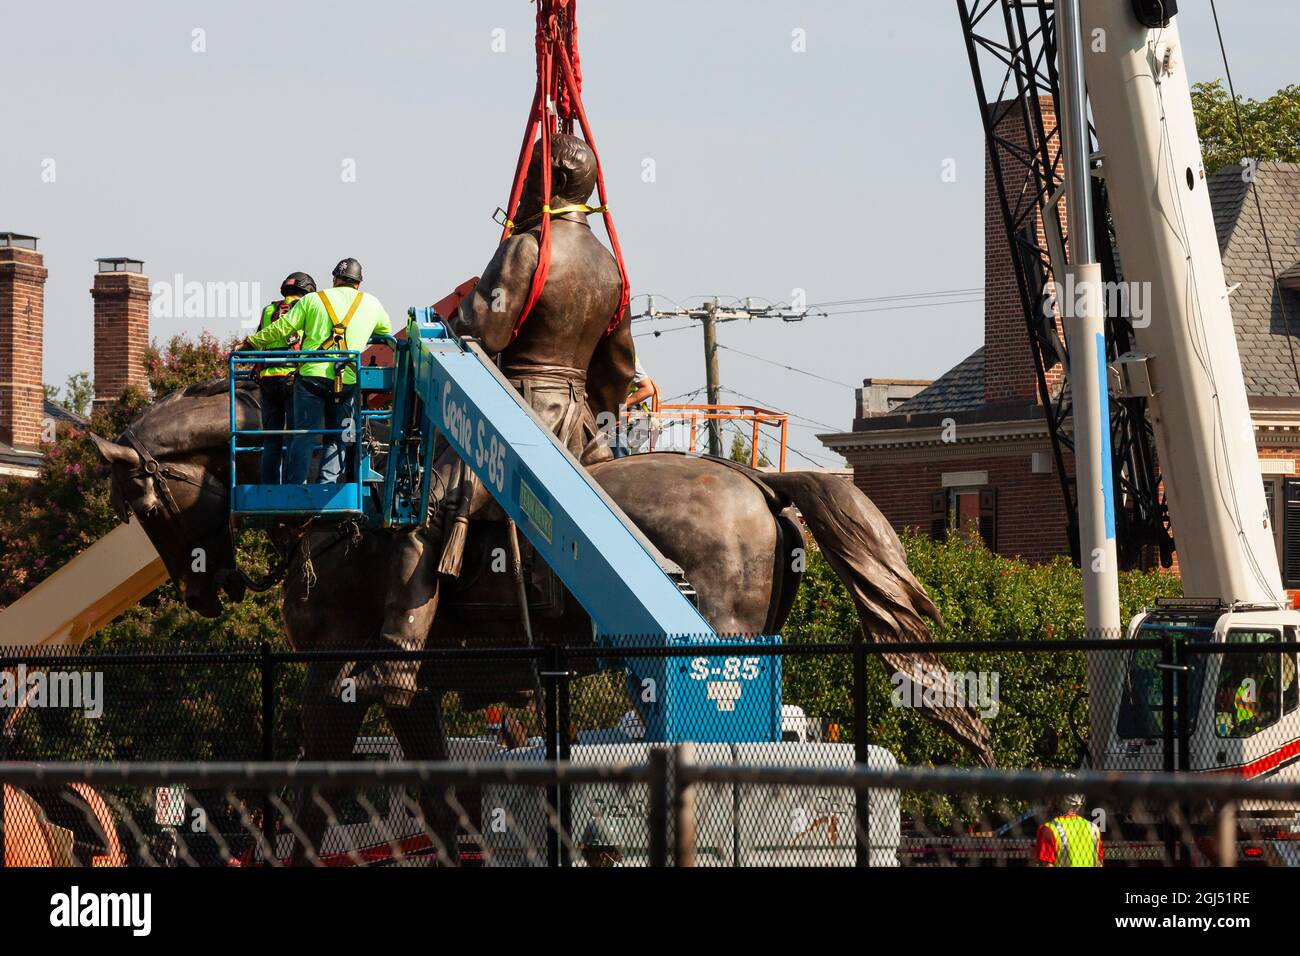 Richmond, VA, USA, 8 September, 2021.  Pictured: Workers saw the statue of Confederate general Robert E. Lee into two pieces for transport following its removal.  The Virginia supreme court ruled last week that the six-story monument could be removed.  It has yet to be determined whether the pedestal covered in anti-racism graffiti will be removed given its prominent role in the 2020 anti-racism uprising in Richmond.  Credit: Allison Bailey / Alamy Live News Stock Photo